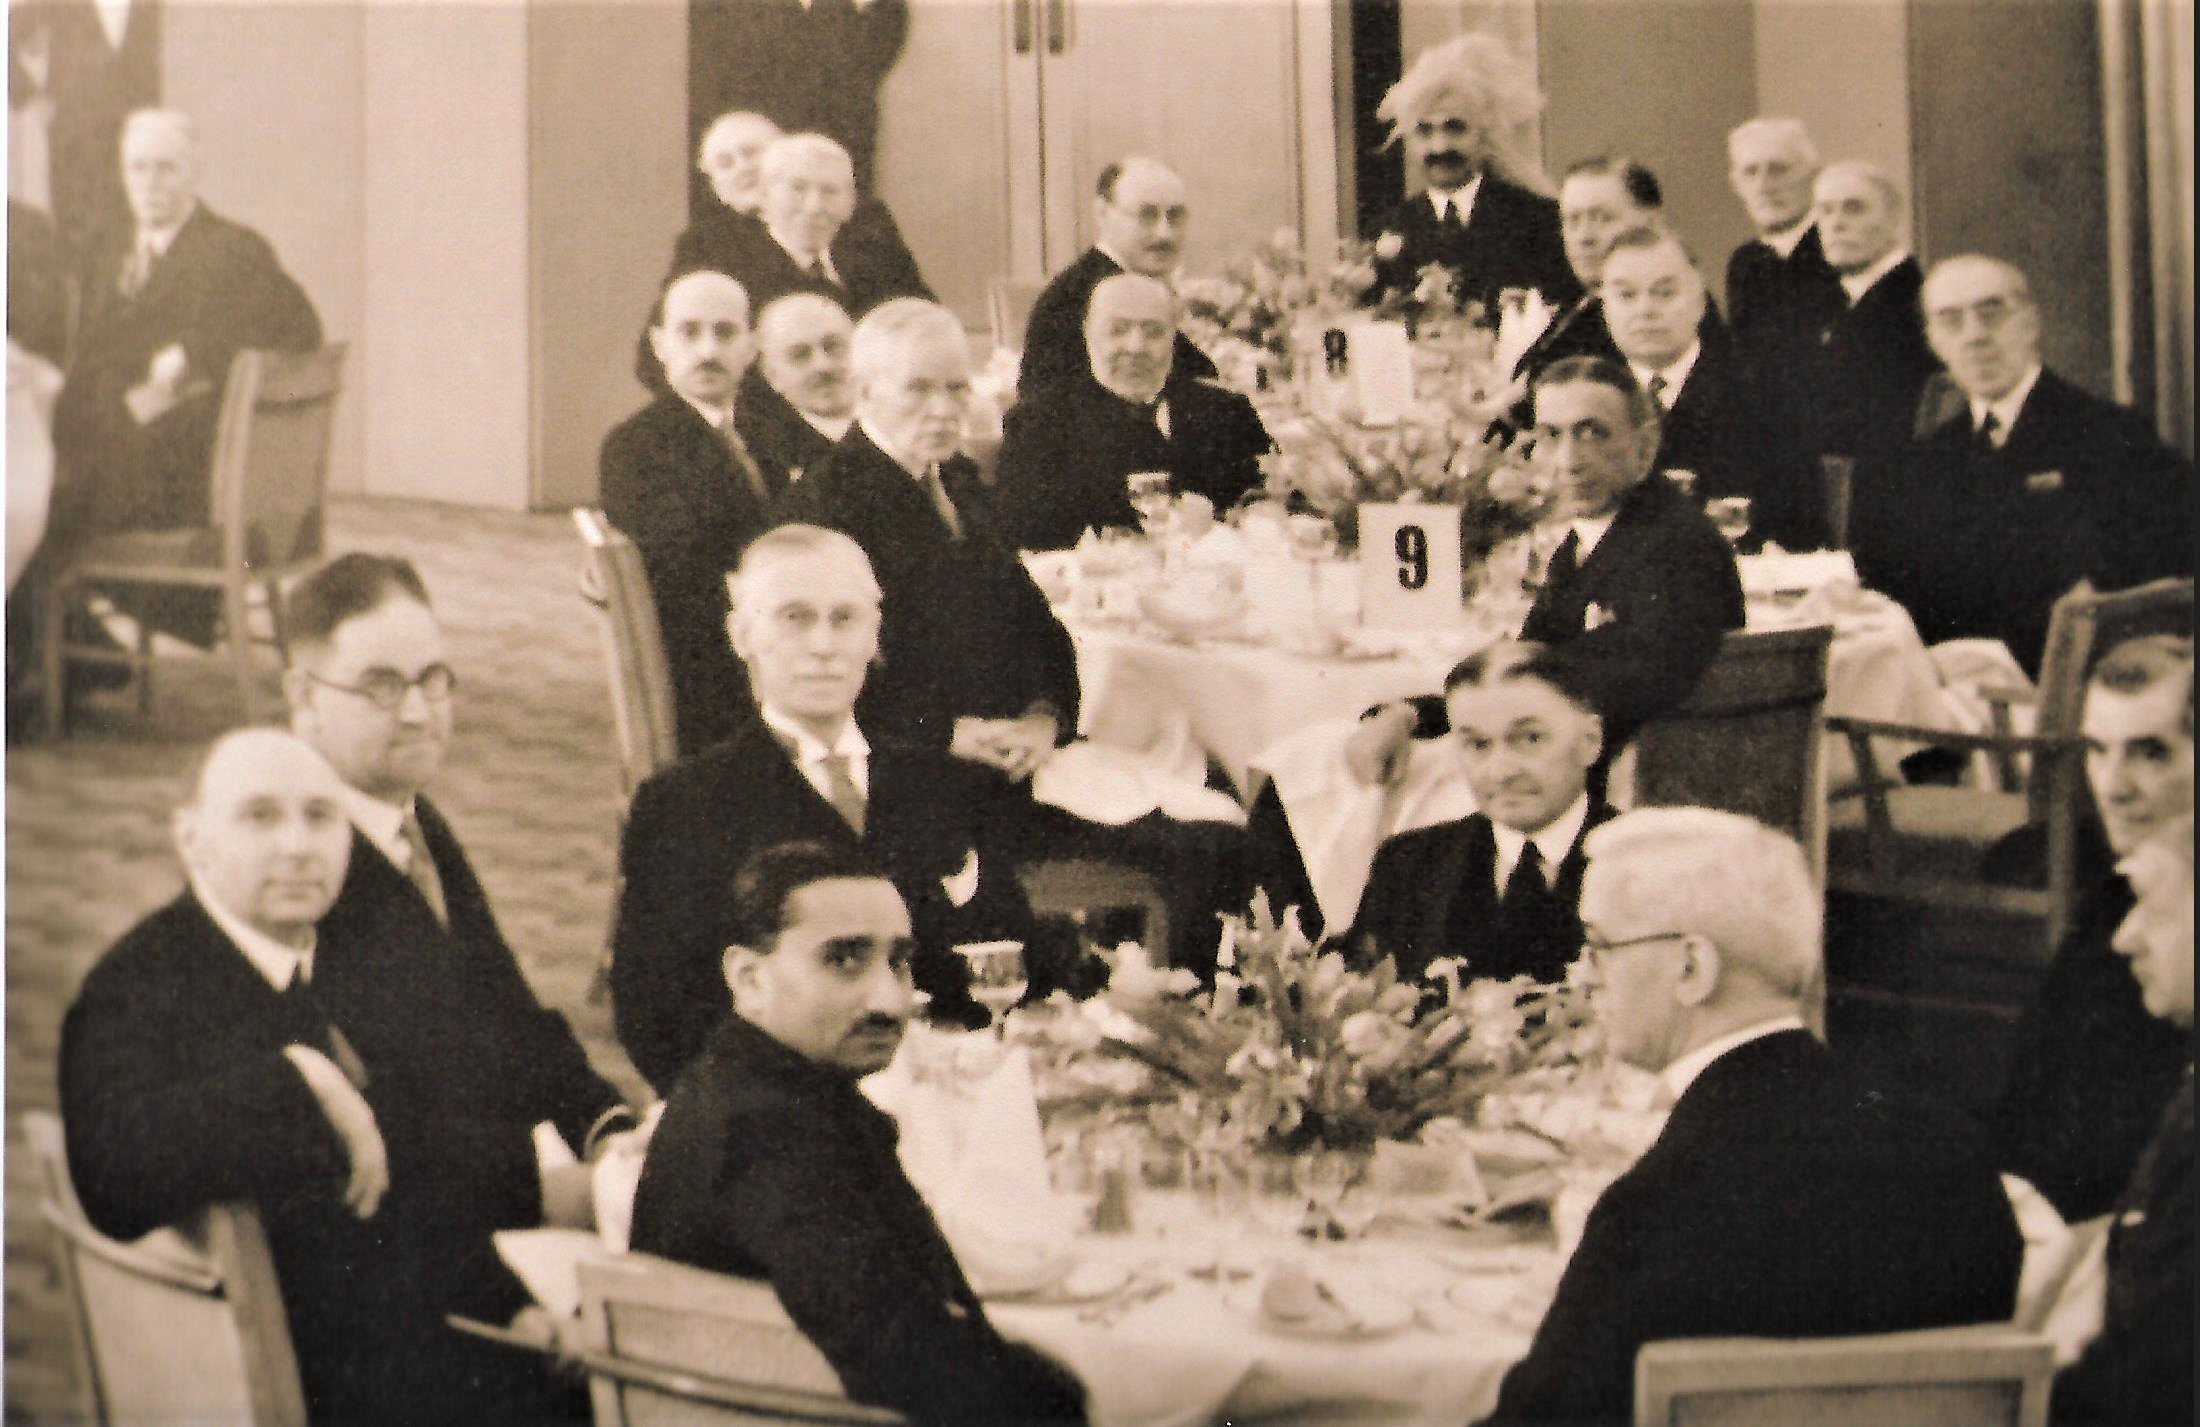 Sir Samad at a dinner during the Second Round Table Conference in London, 1931. He is seated on Table 9 next to the table number.